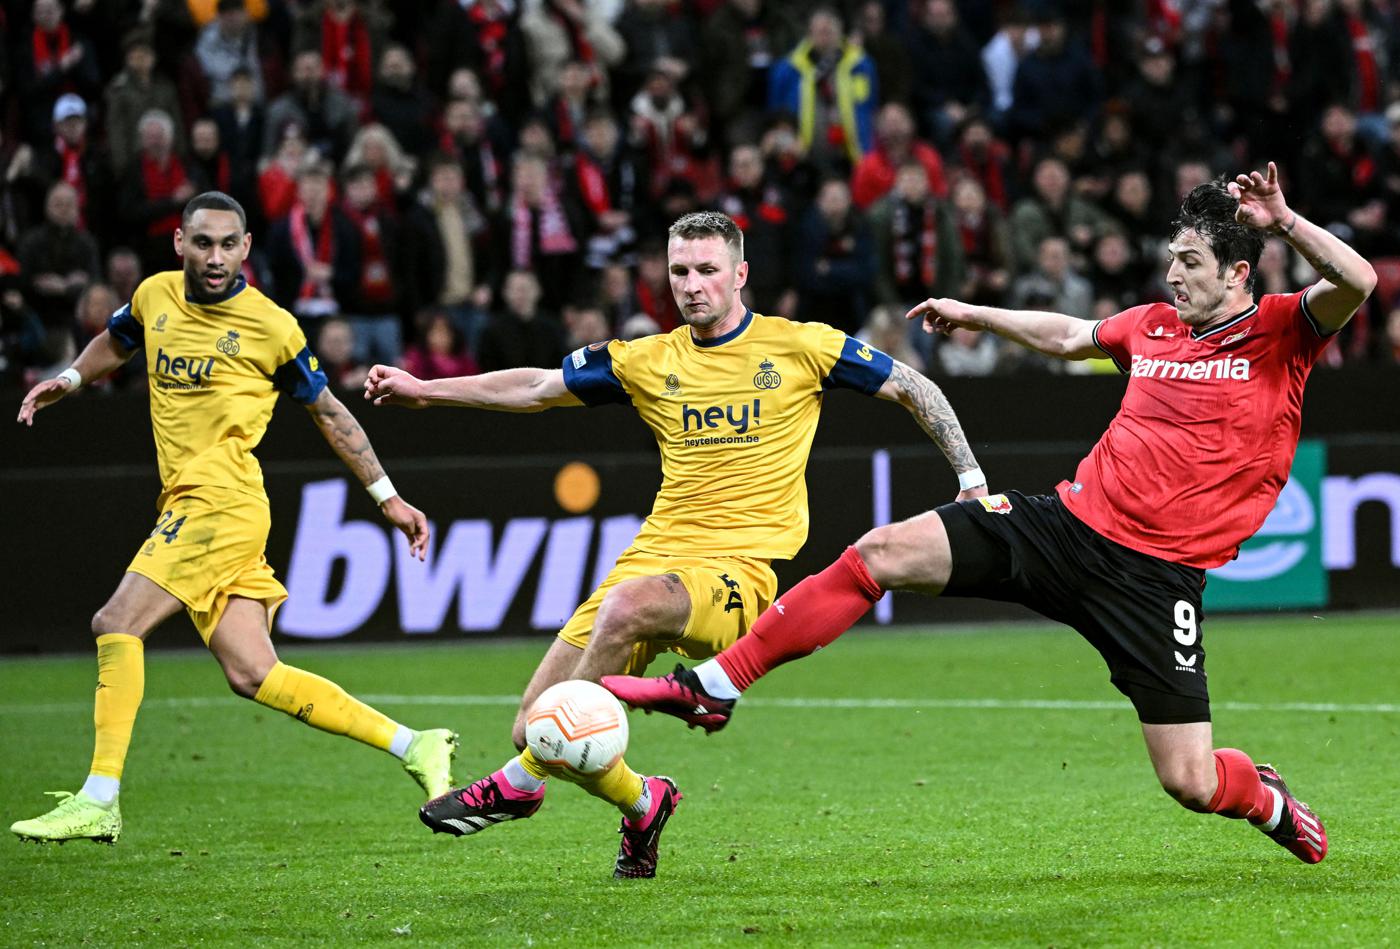 Union St. Gilloise - Bayer - 1:4. Europa League. Match review, statistics.